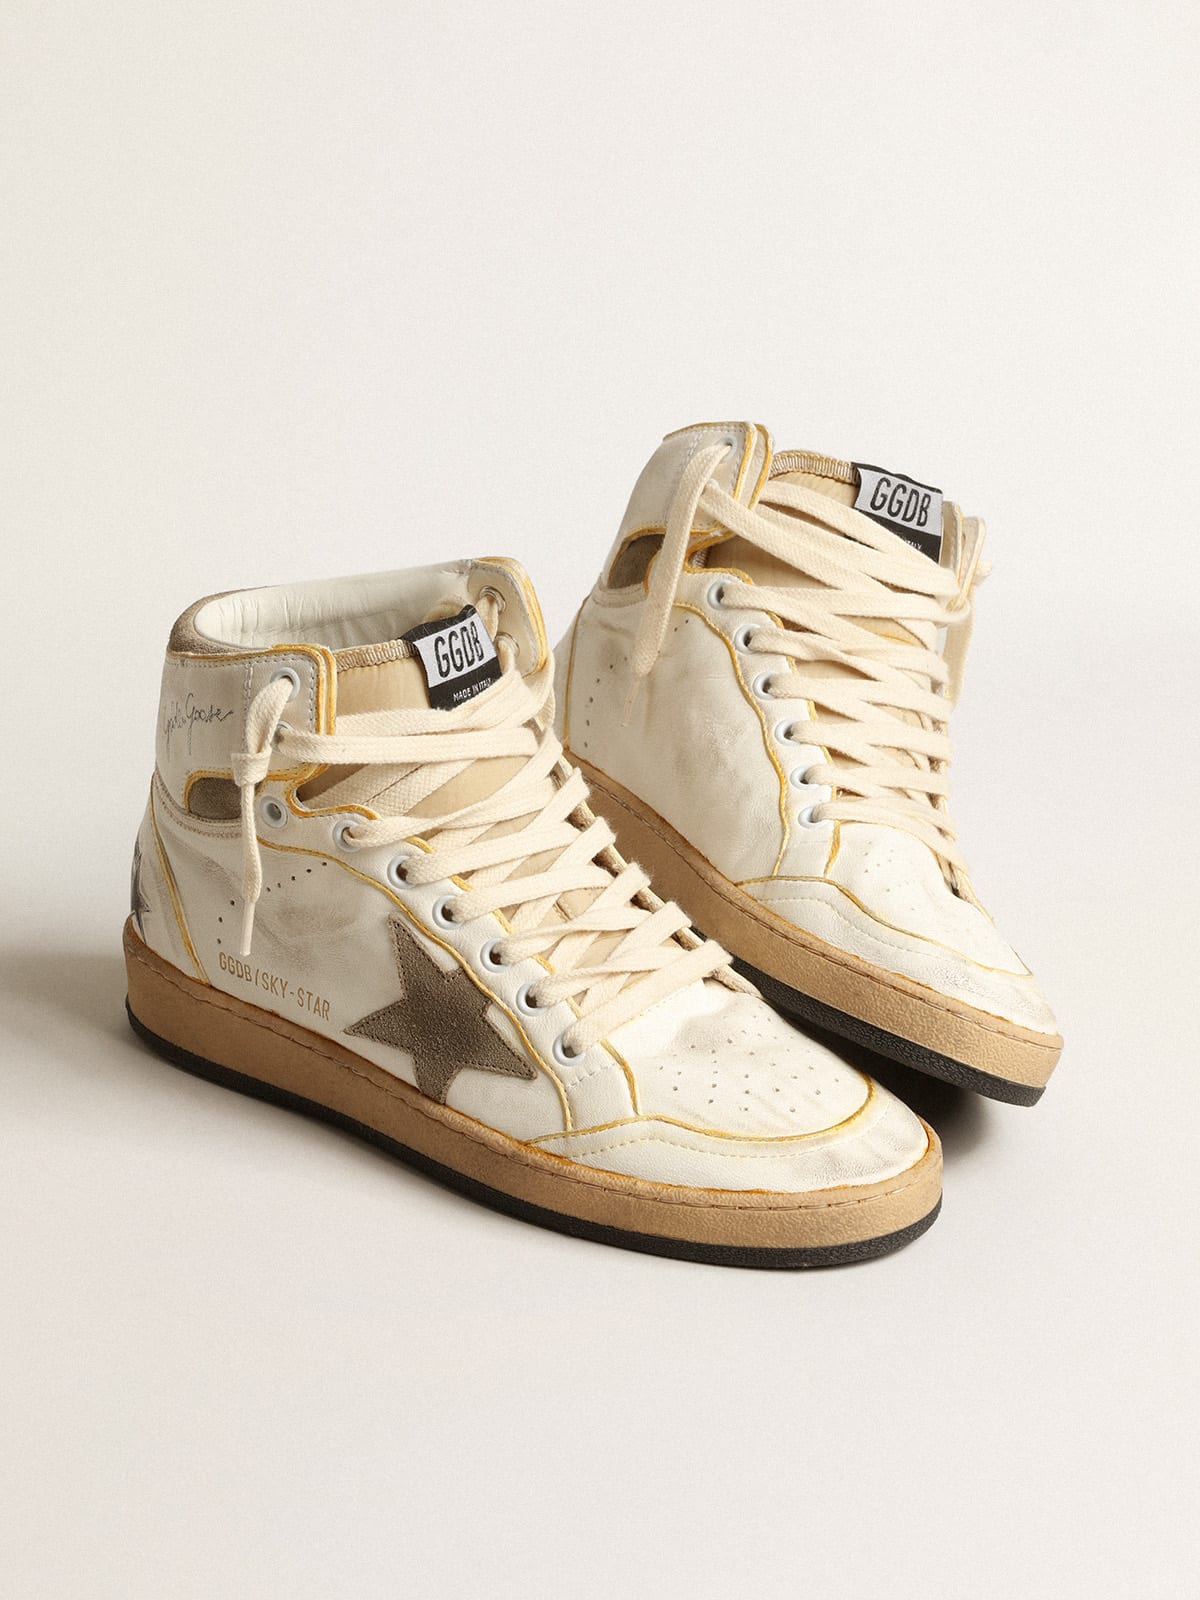 Golden Goose - Men’s Sky-Star in white nappa leather with dove-gray suede star in 